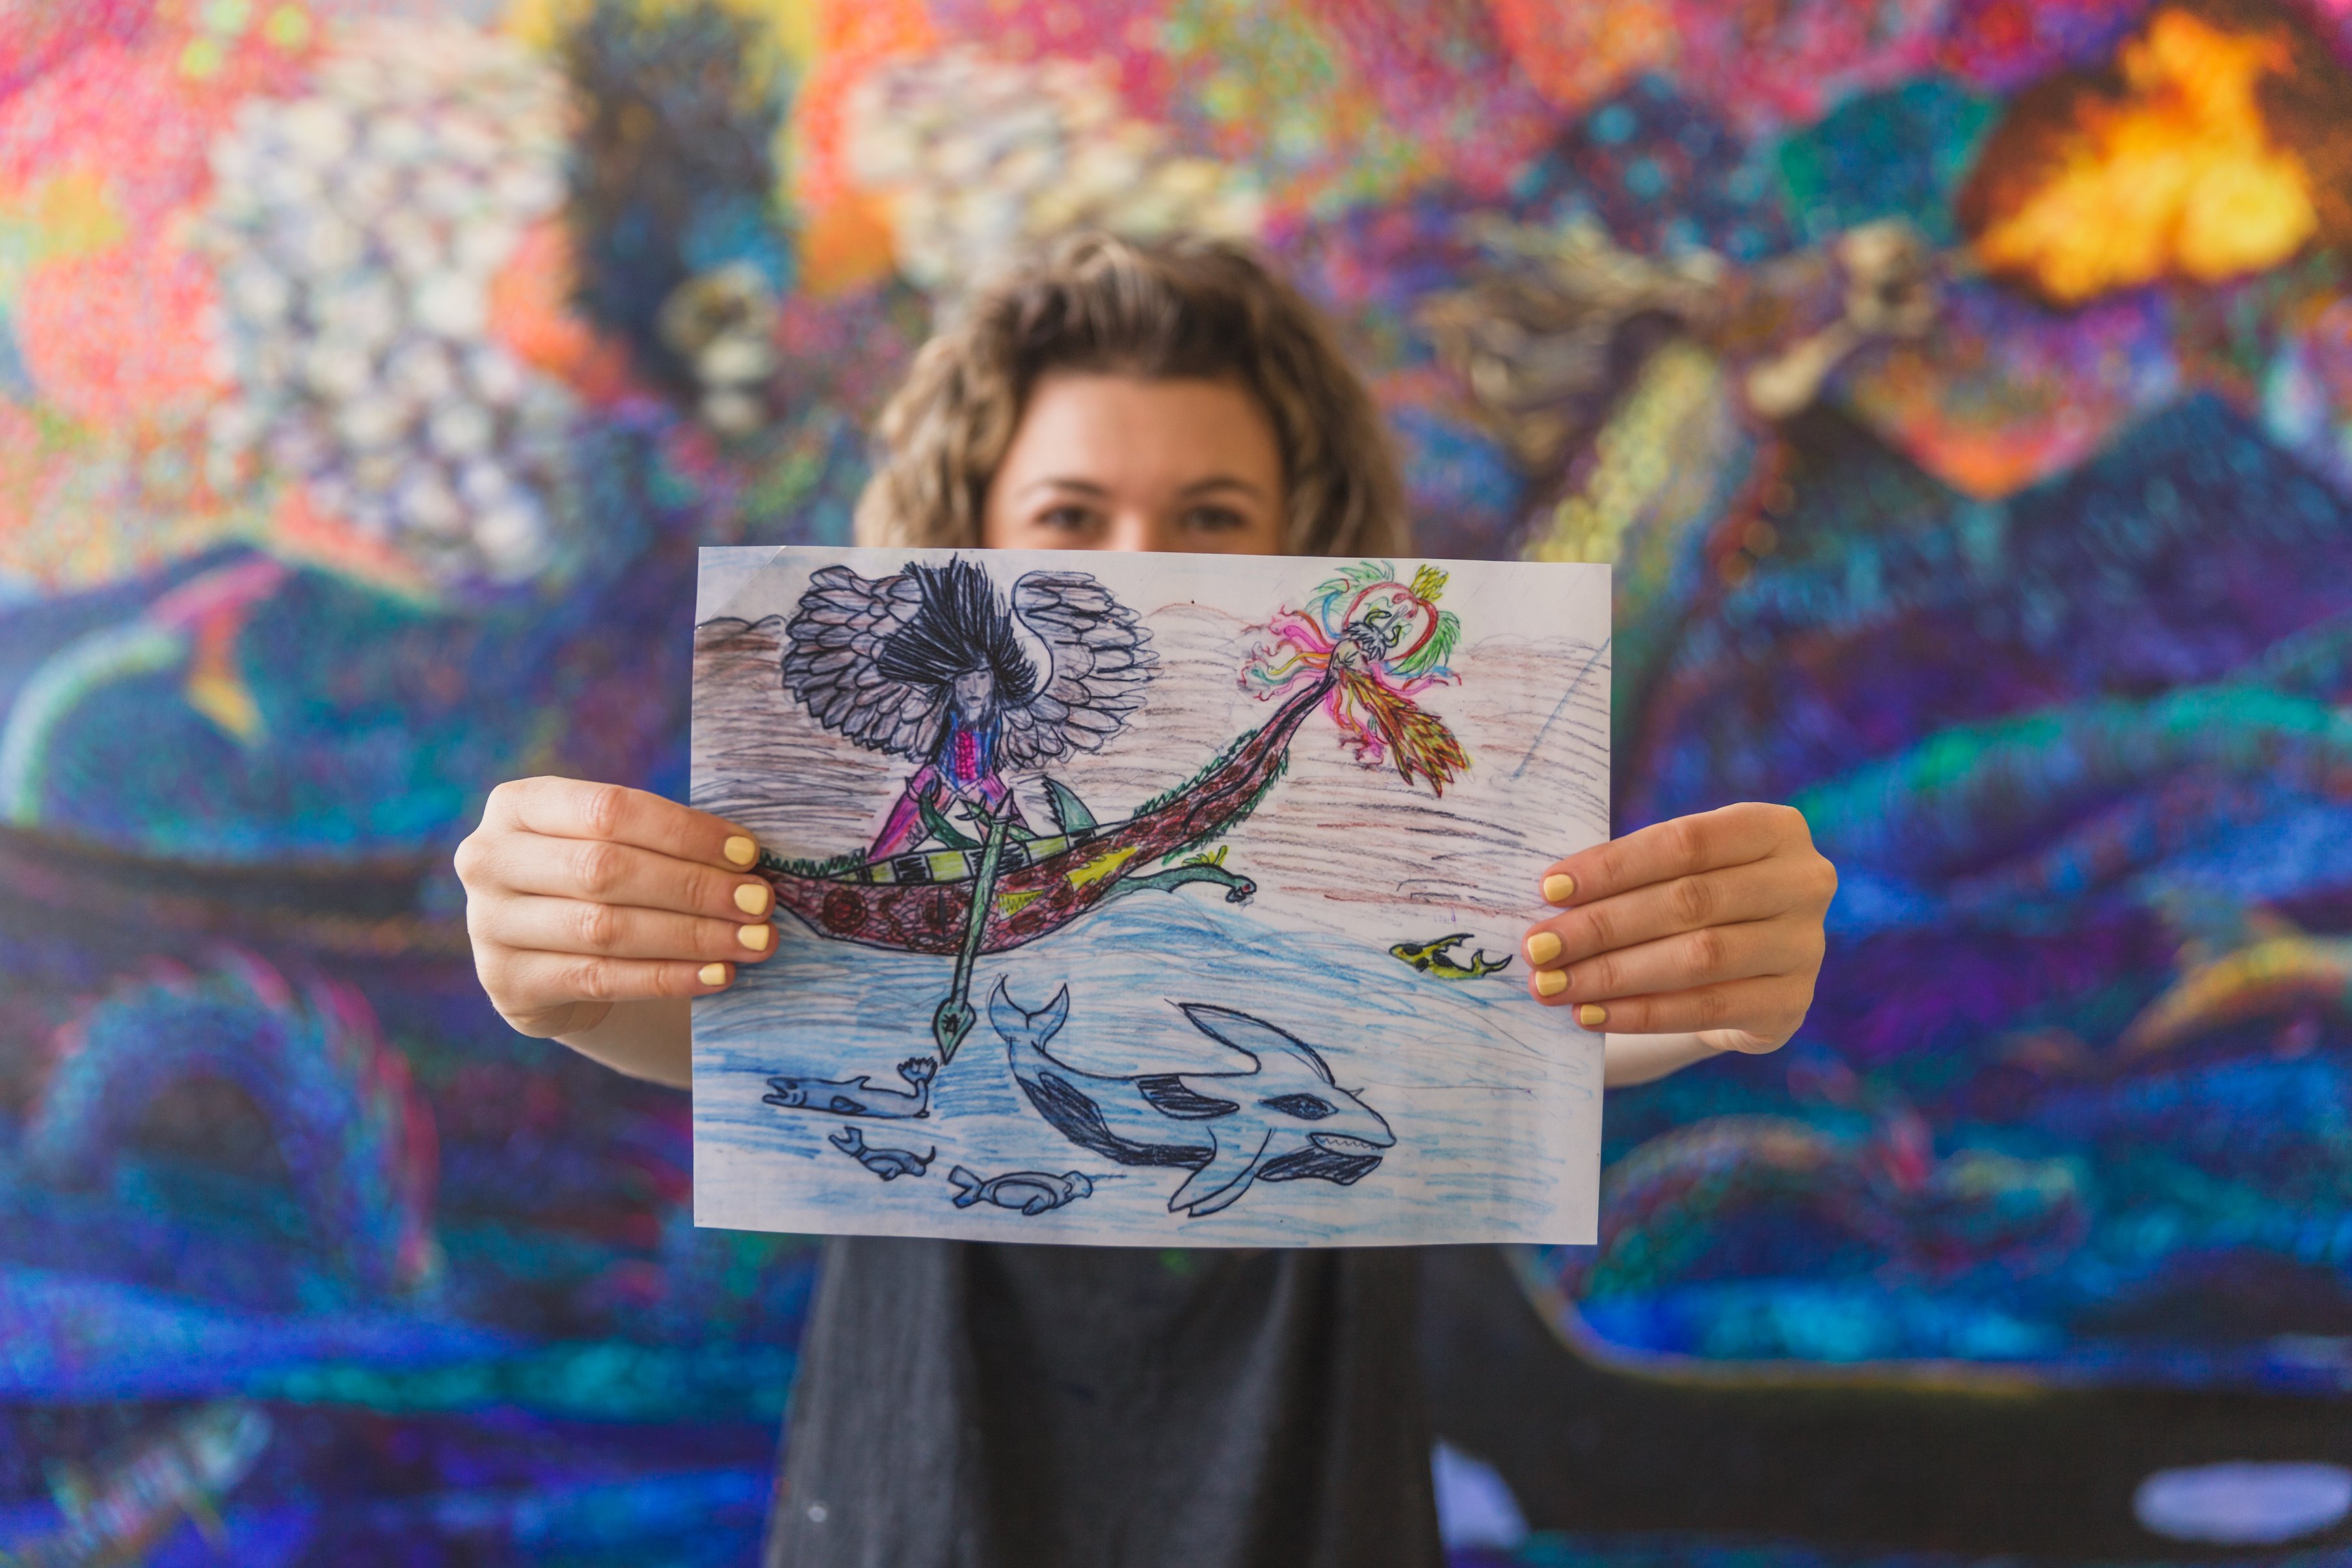 Iris Scott with a childhood drawing that is the basis for a work in her new show, "Ritual in Pairing." Photo by ErikNuenighoff.